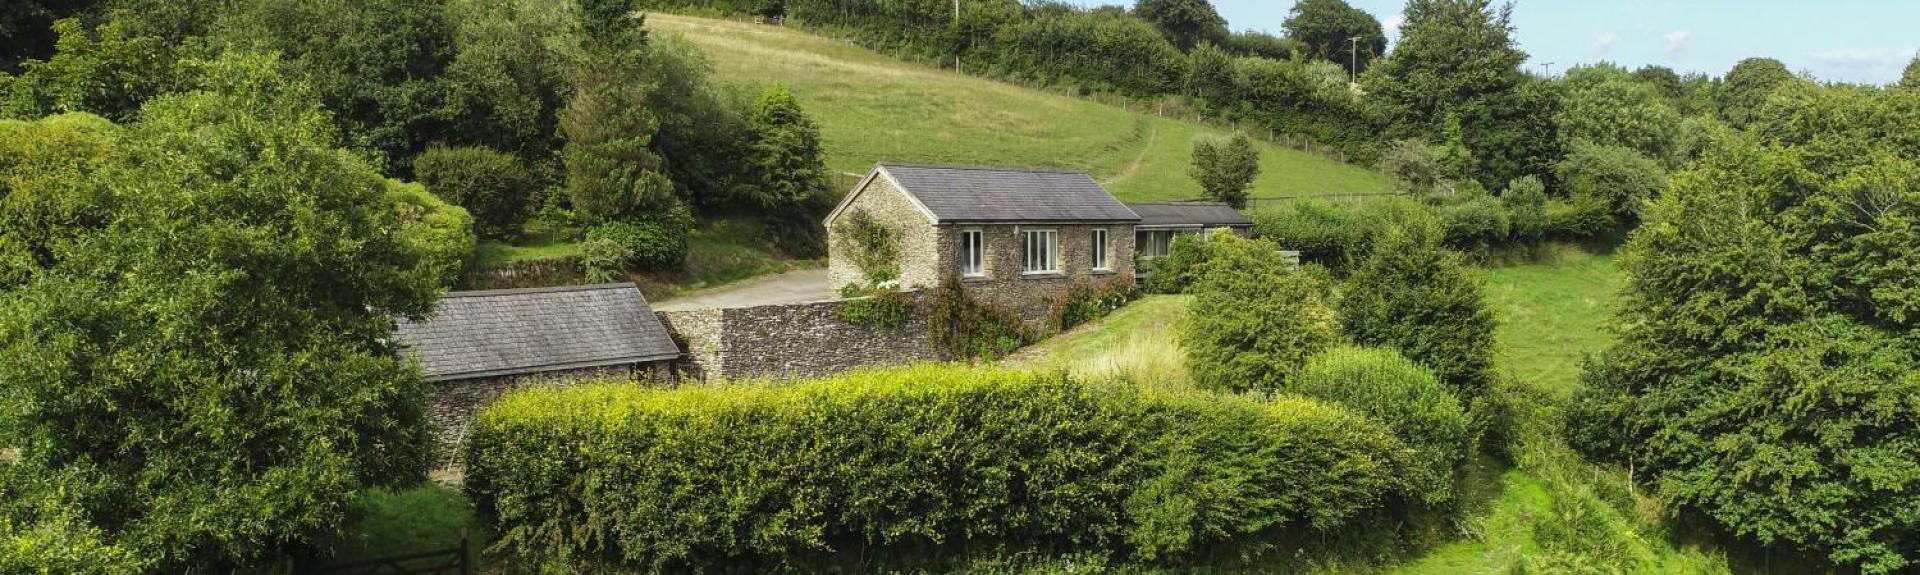 A remote hillside lodge on the side of a hill surrounded by fields,hedgerows and trees.